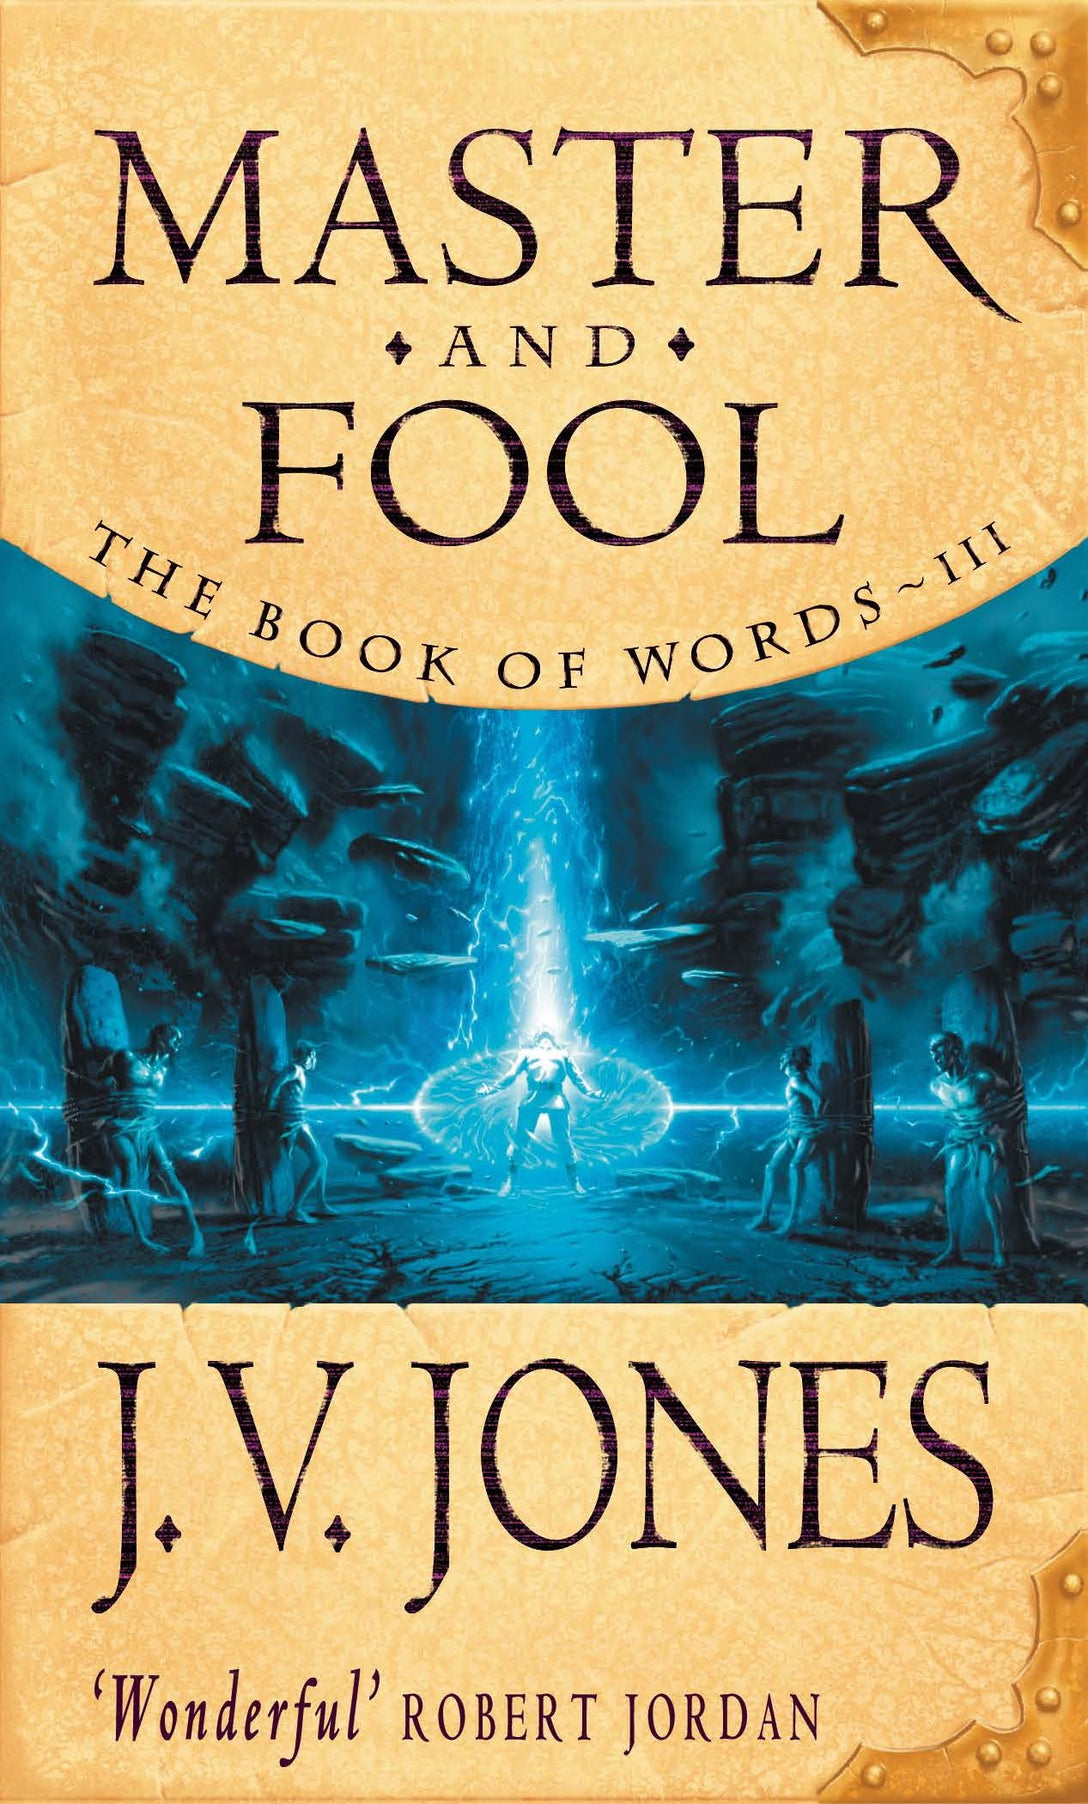 Master And Fool by J V Jones